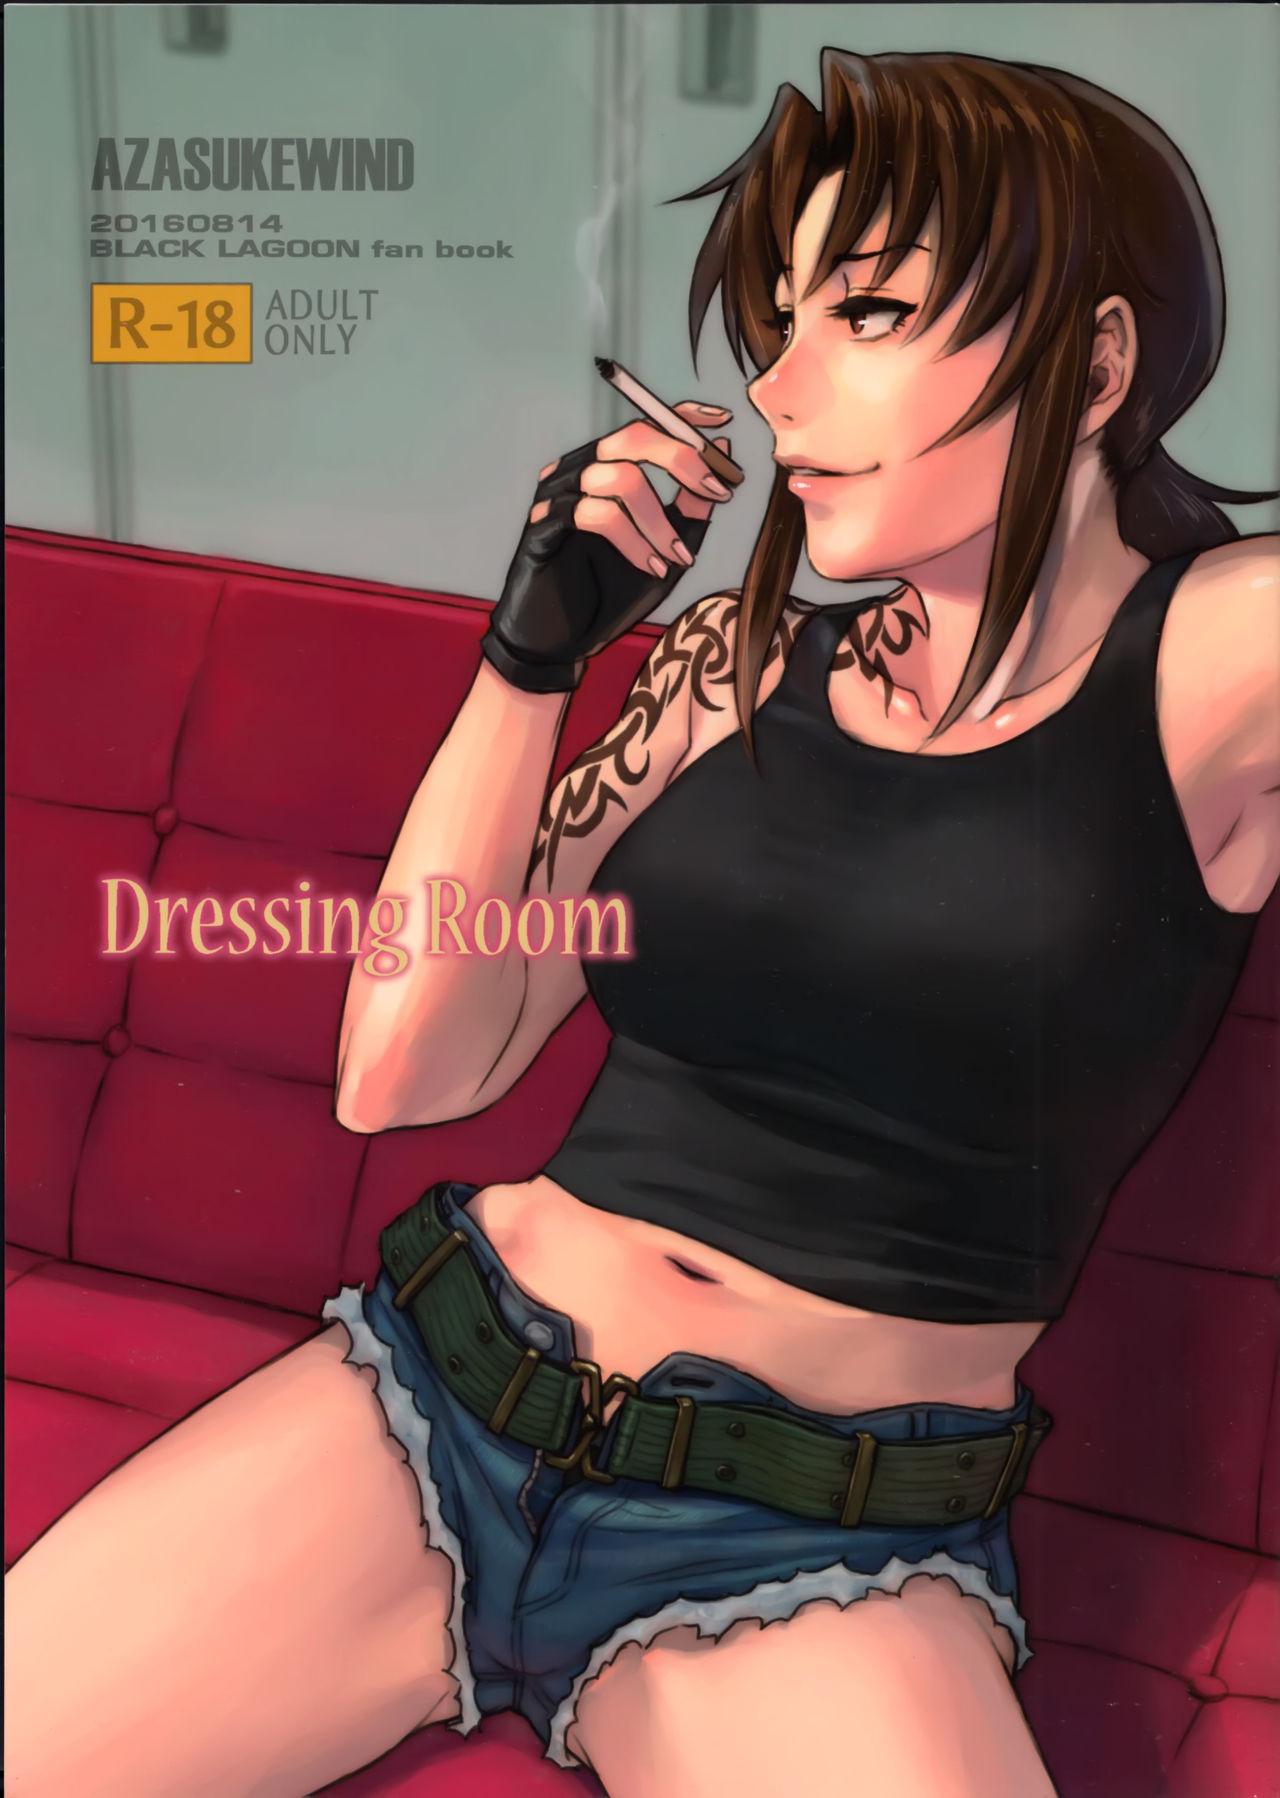 Friends Dressing Room - Black lagoon English - Picture 1